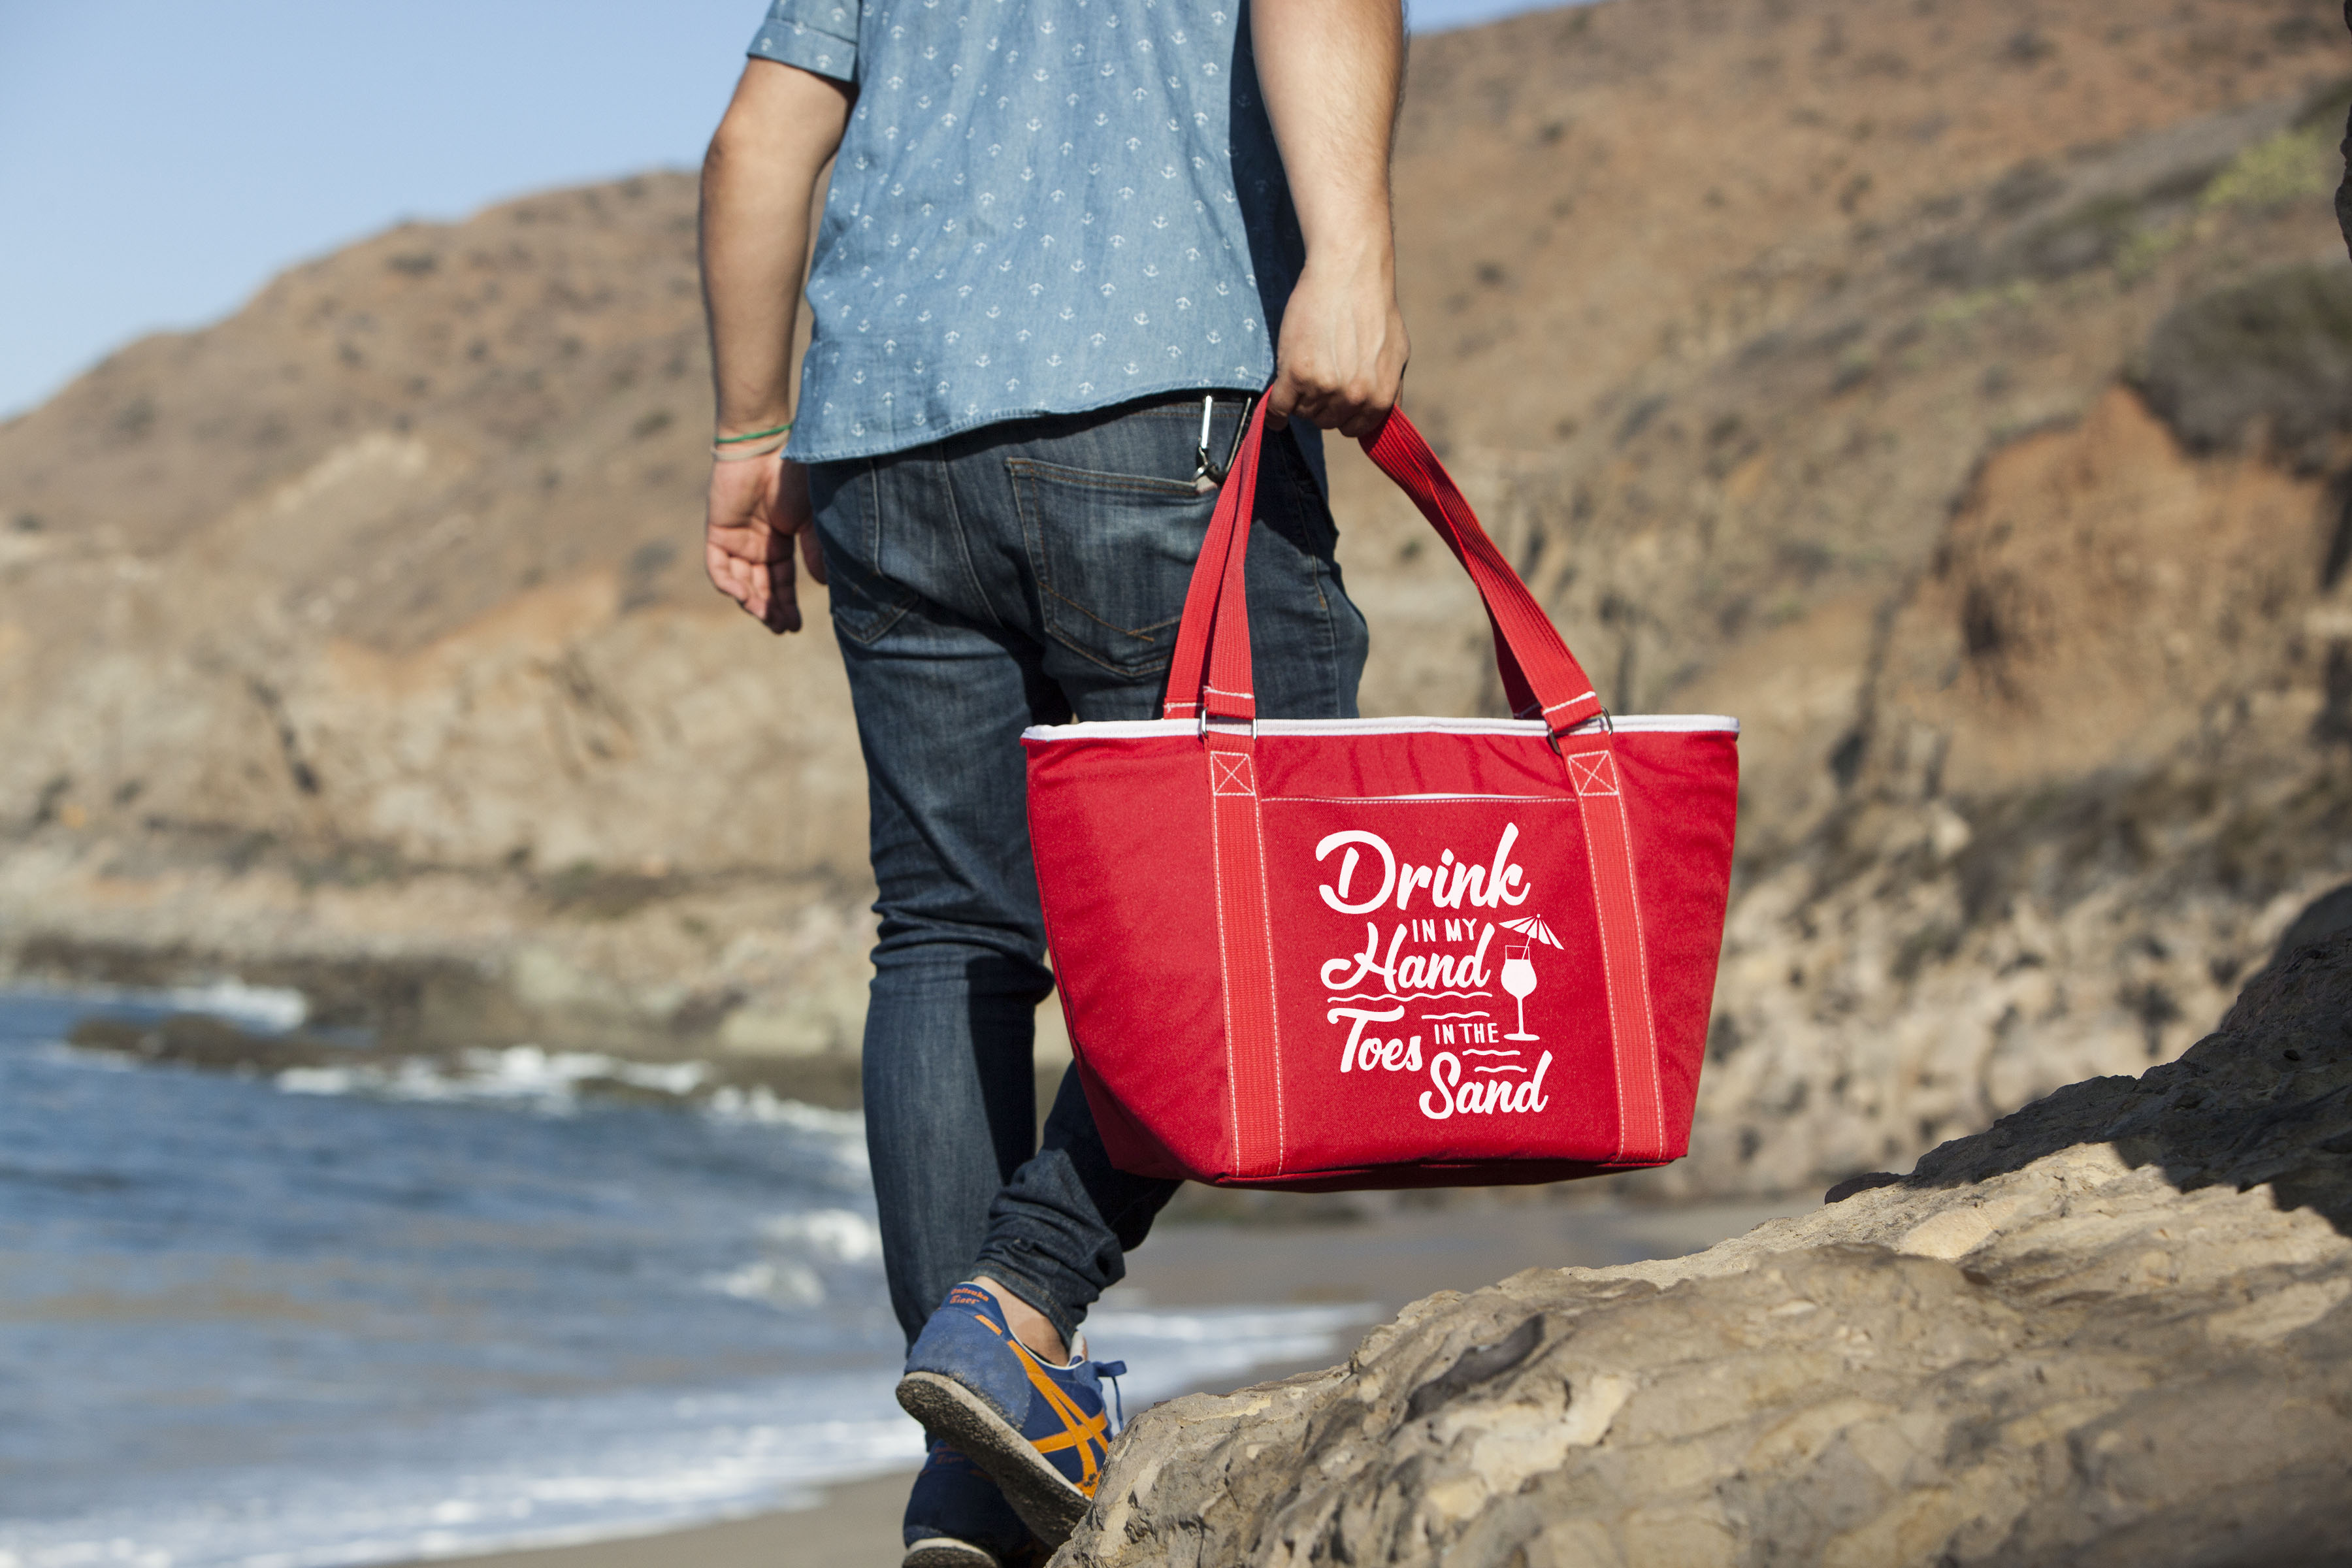 Beach Sayings Drink in my Hand Toes in the Sand - Topanga Cooler Tote Bag